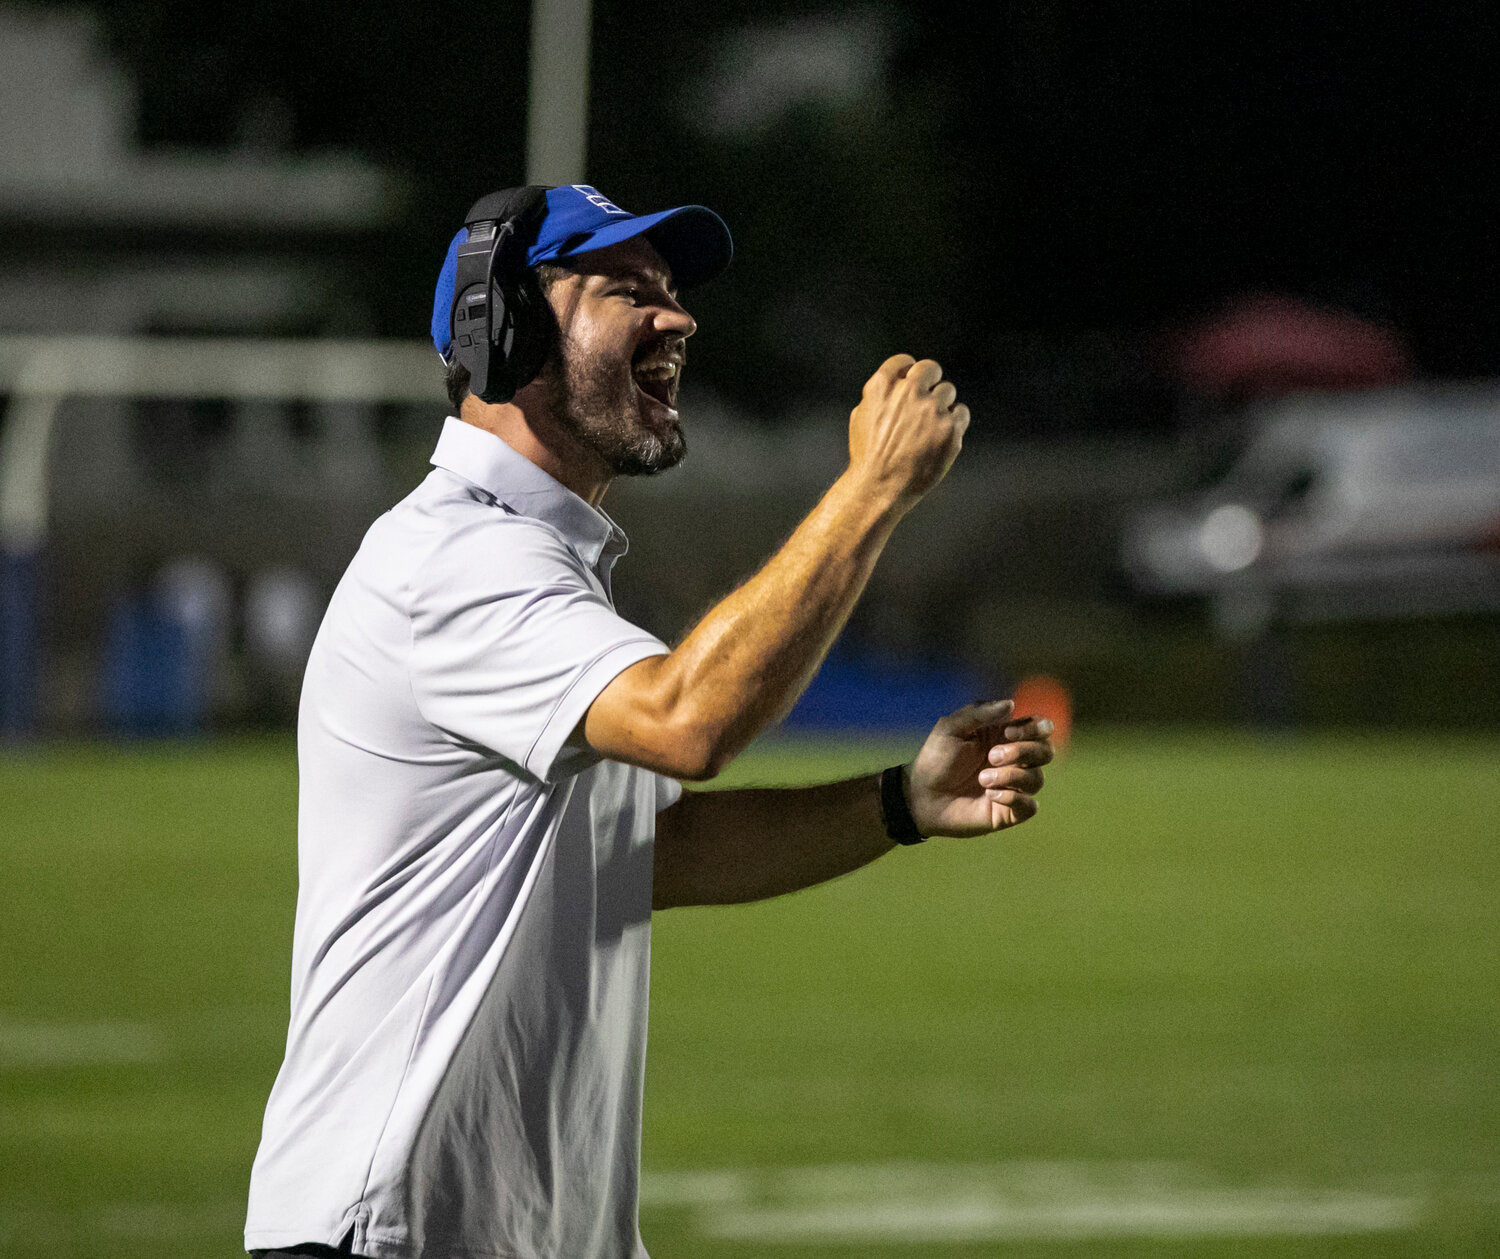 Bayside Academy head coach Barrett Trotter celebrates an Admiral touchdown Friday night at Freedom Field in Daphne as part of Bayside Academy’s first regular-season game. Trotter notched his first win as the Admirals’ head man by a 33-7 score over Elberta.